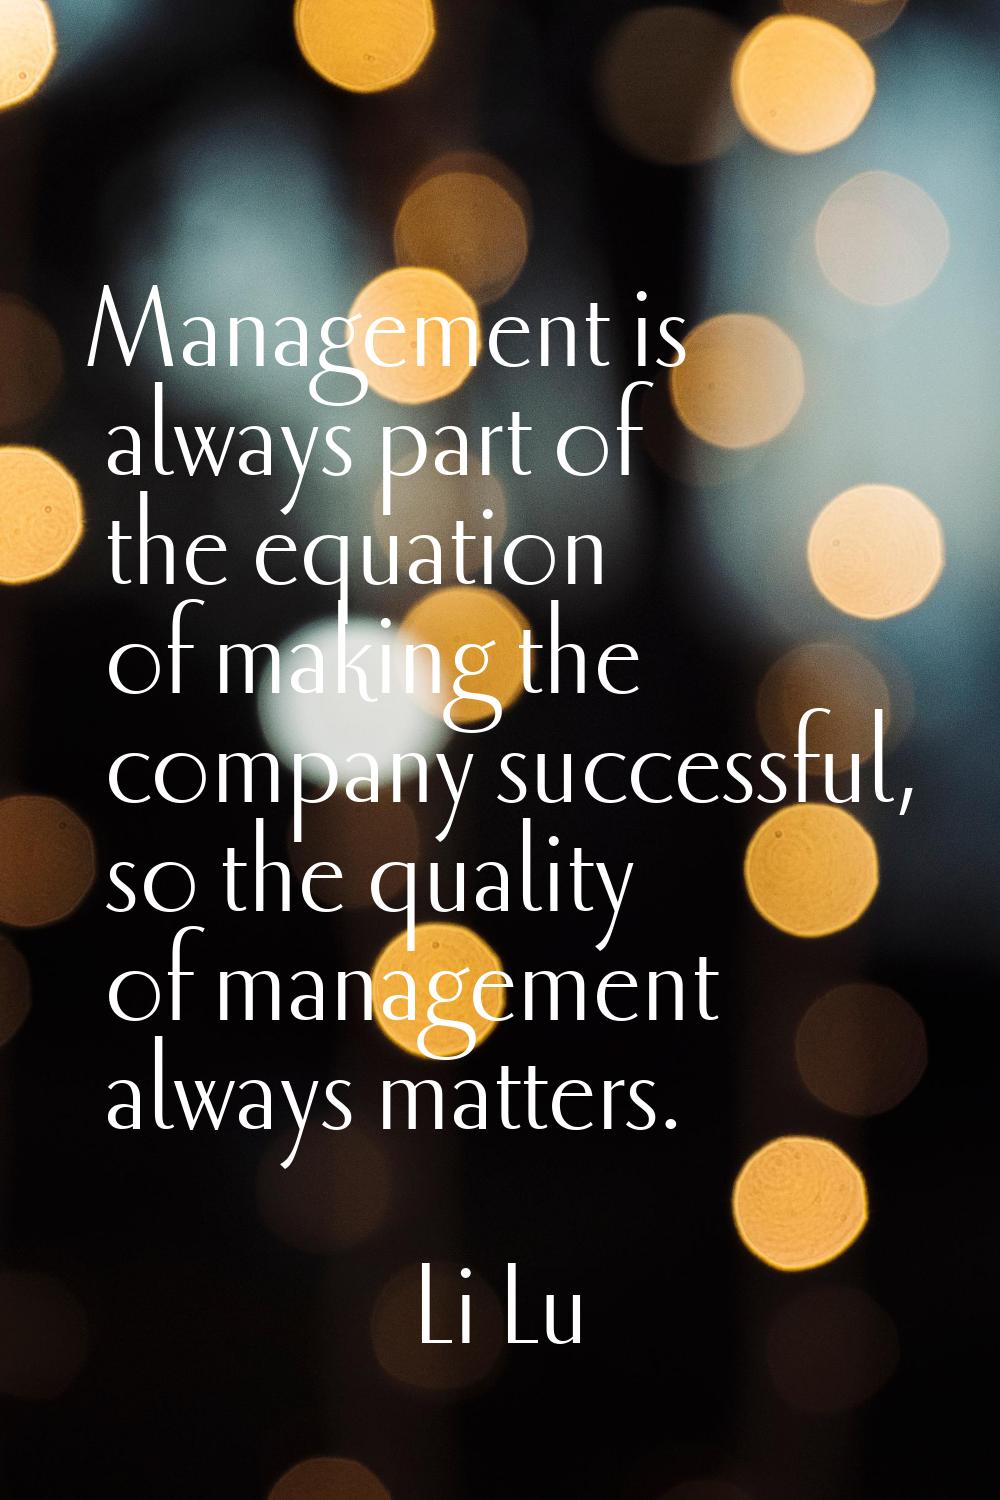 Management is always part of the equation of making the company successful, so the quality of manag